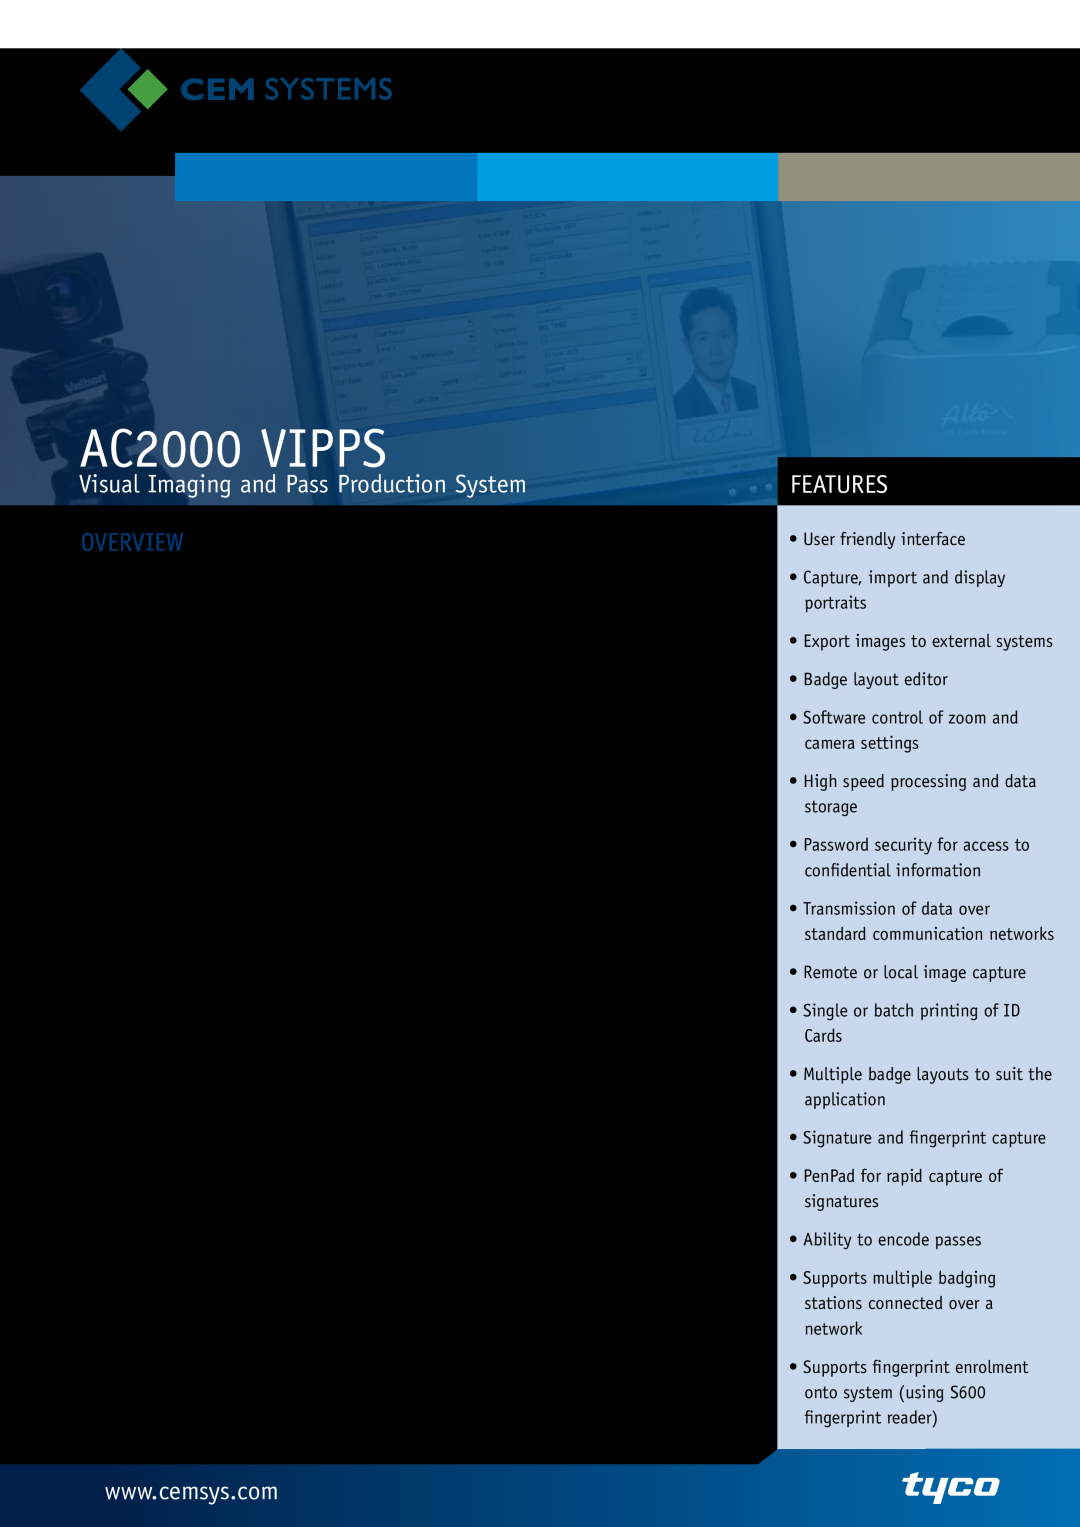 Tyco AC2000 VIPPS manual Visual Imaging and Pass Production System, Features, Overview 